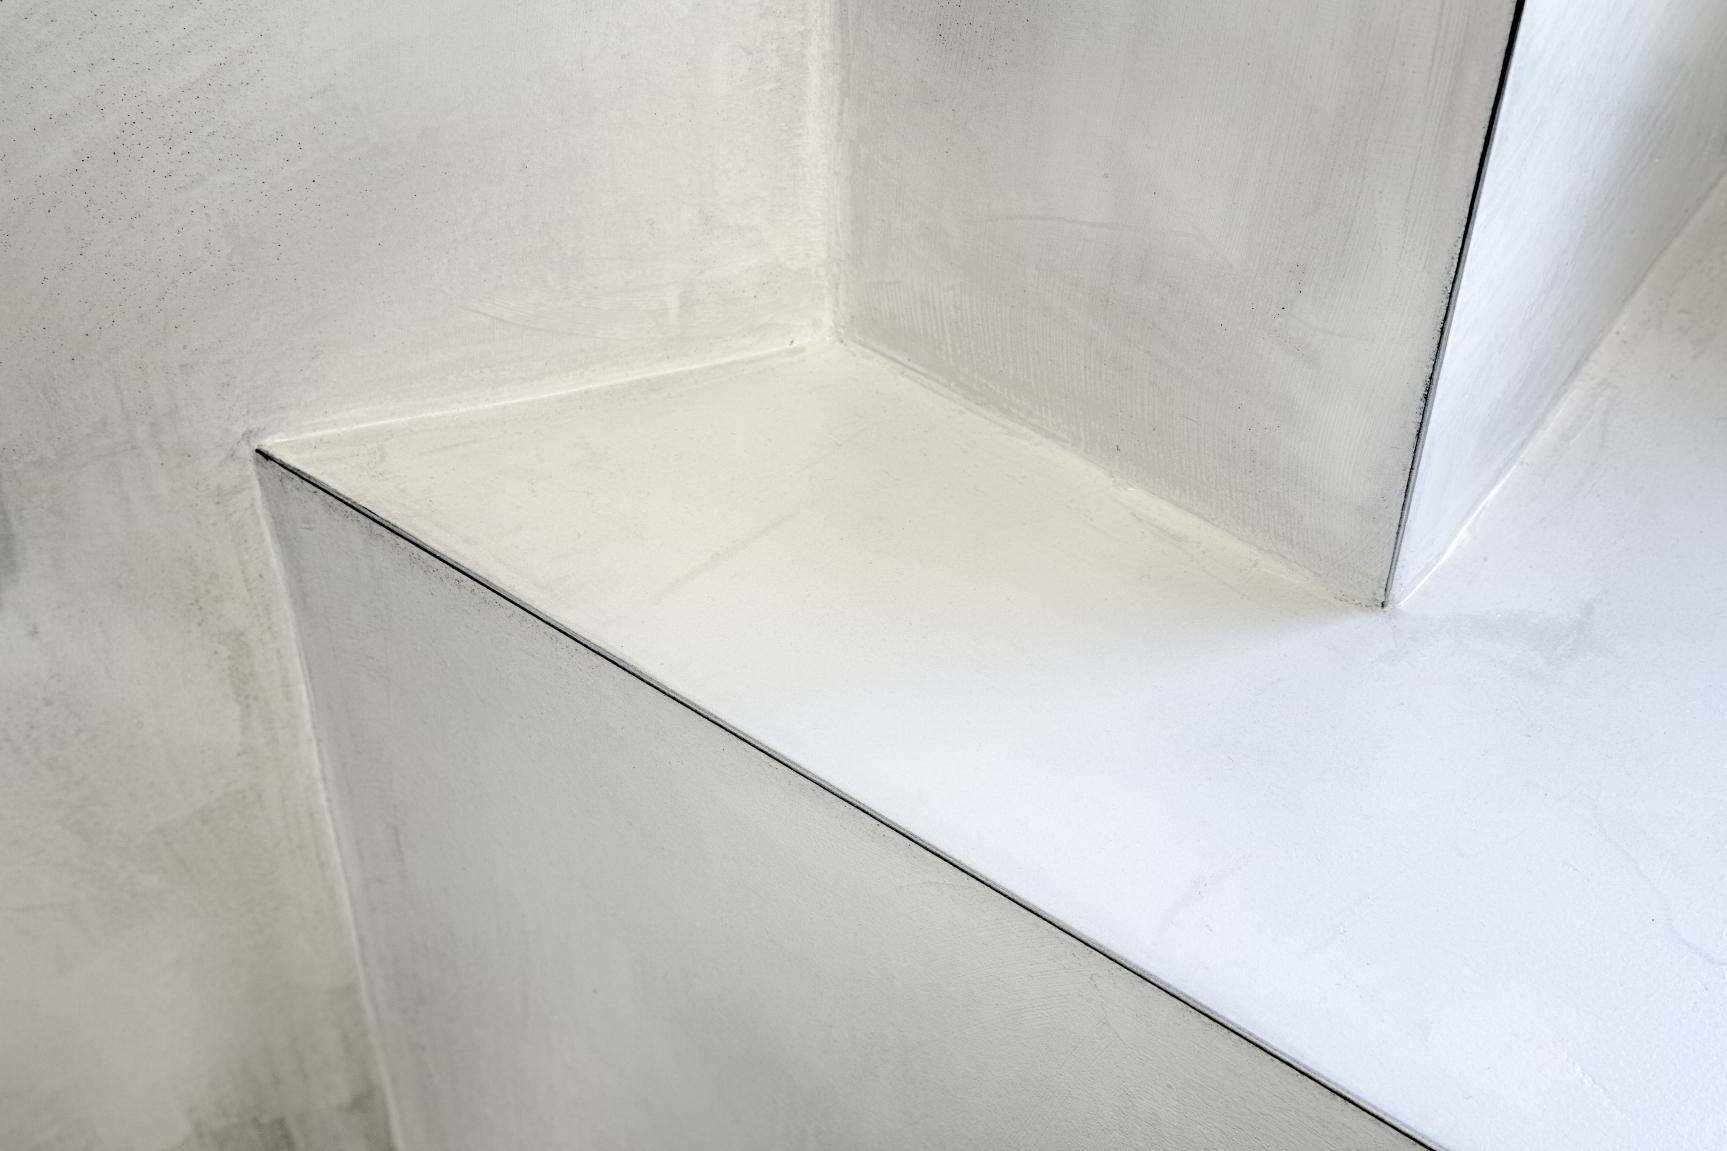 Microcement on wall and bathroom shelf in the Malermeister project.